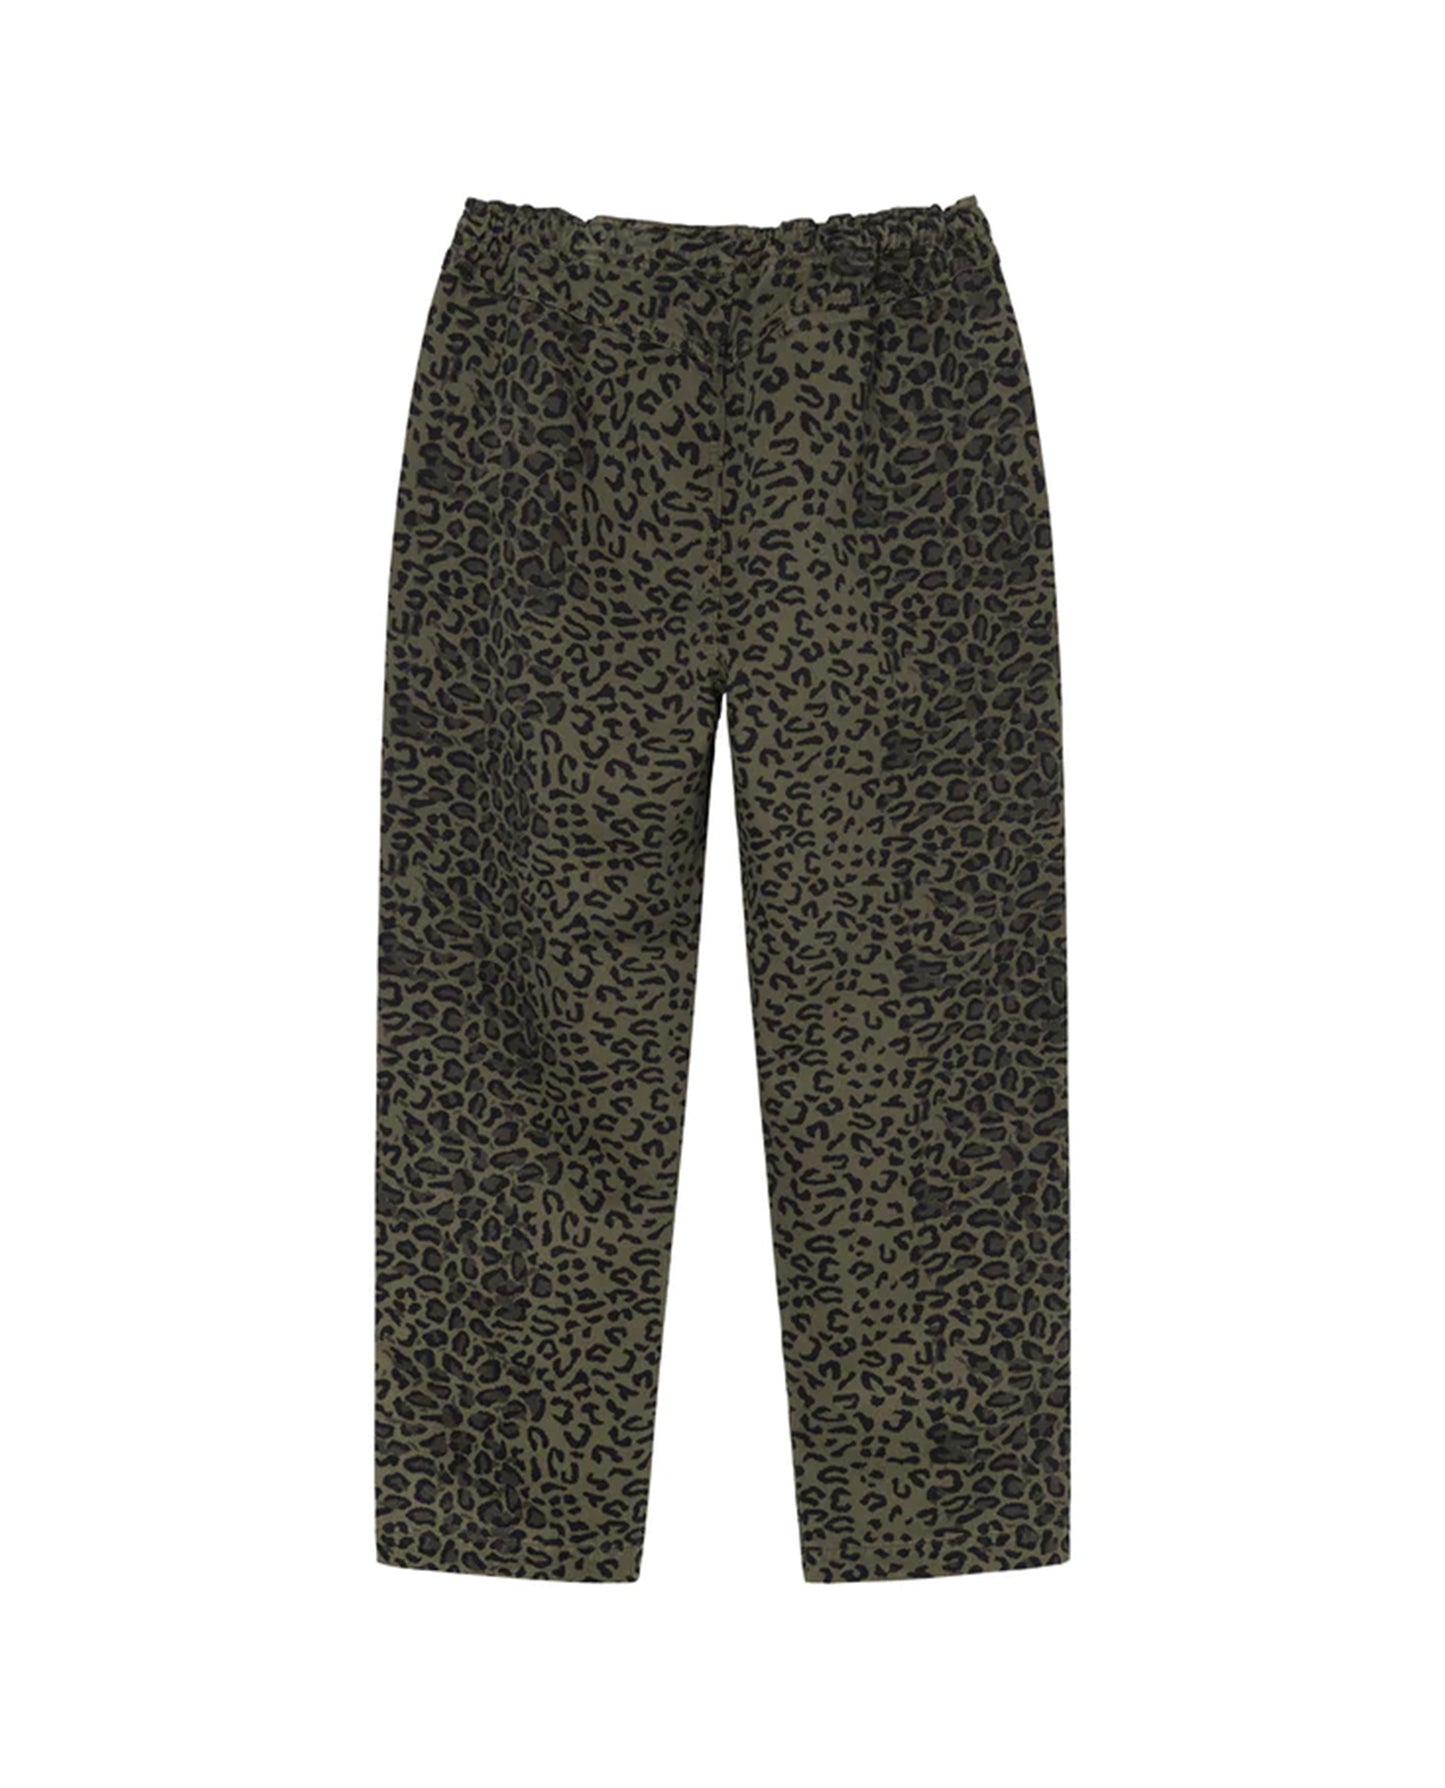 Stussy Leopard Beach Pant | STASHED